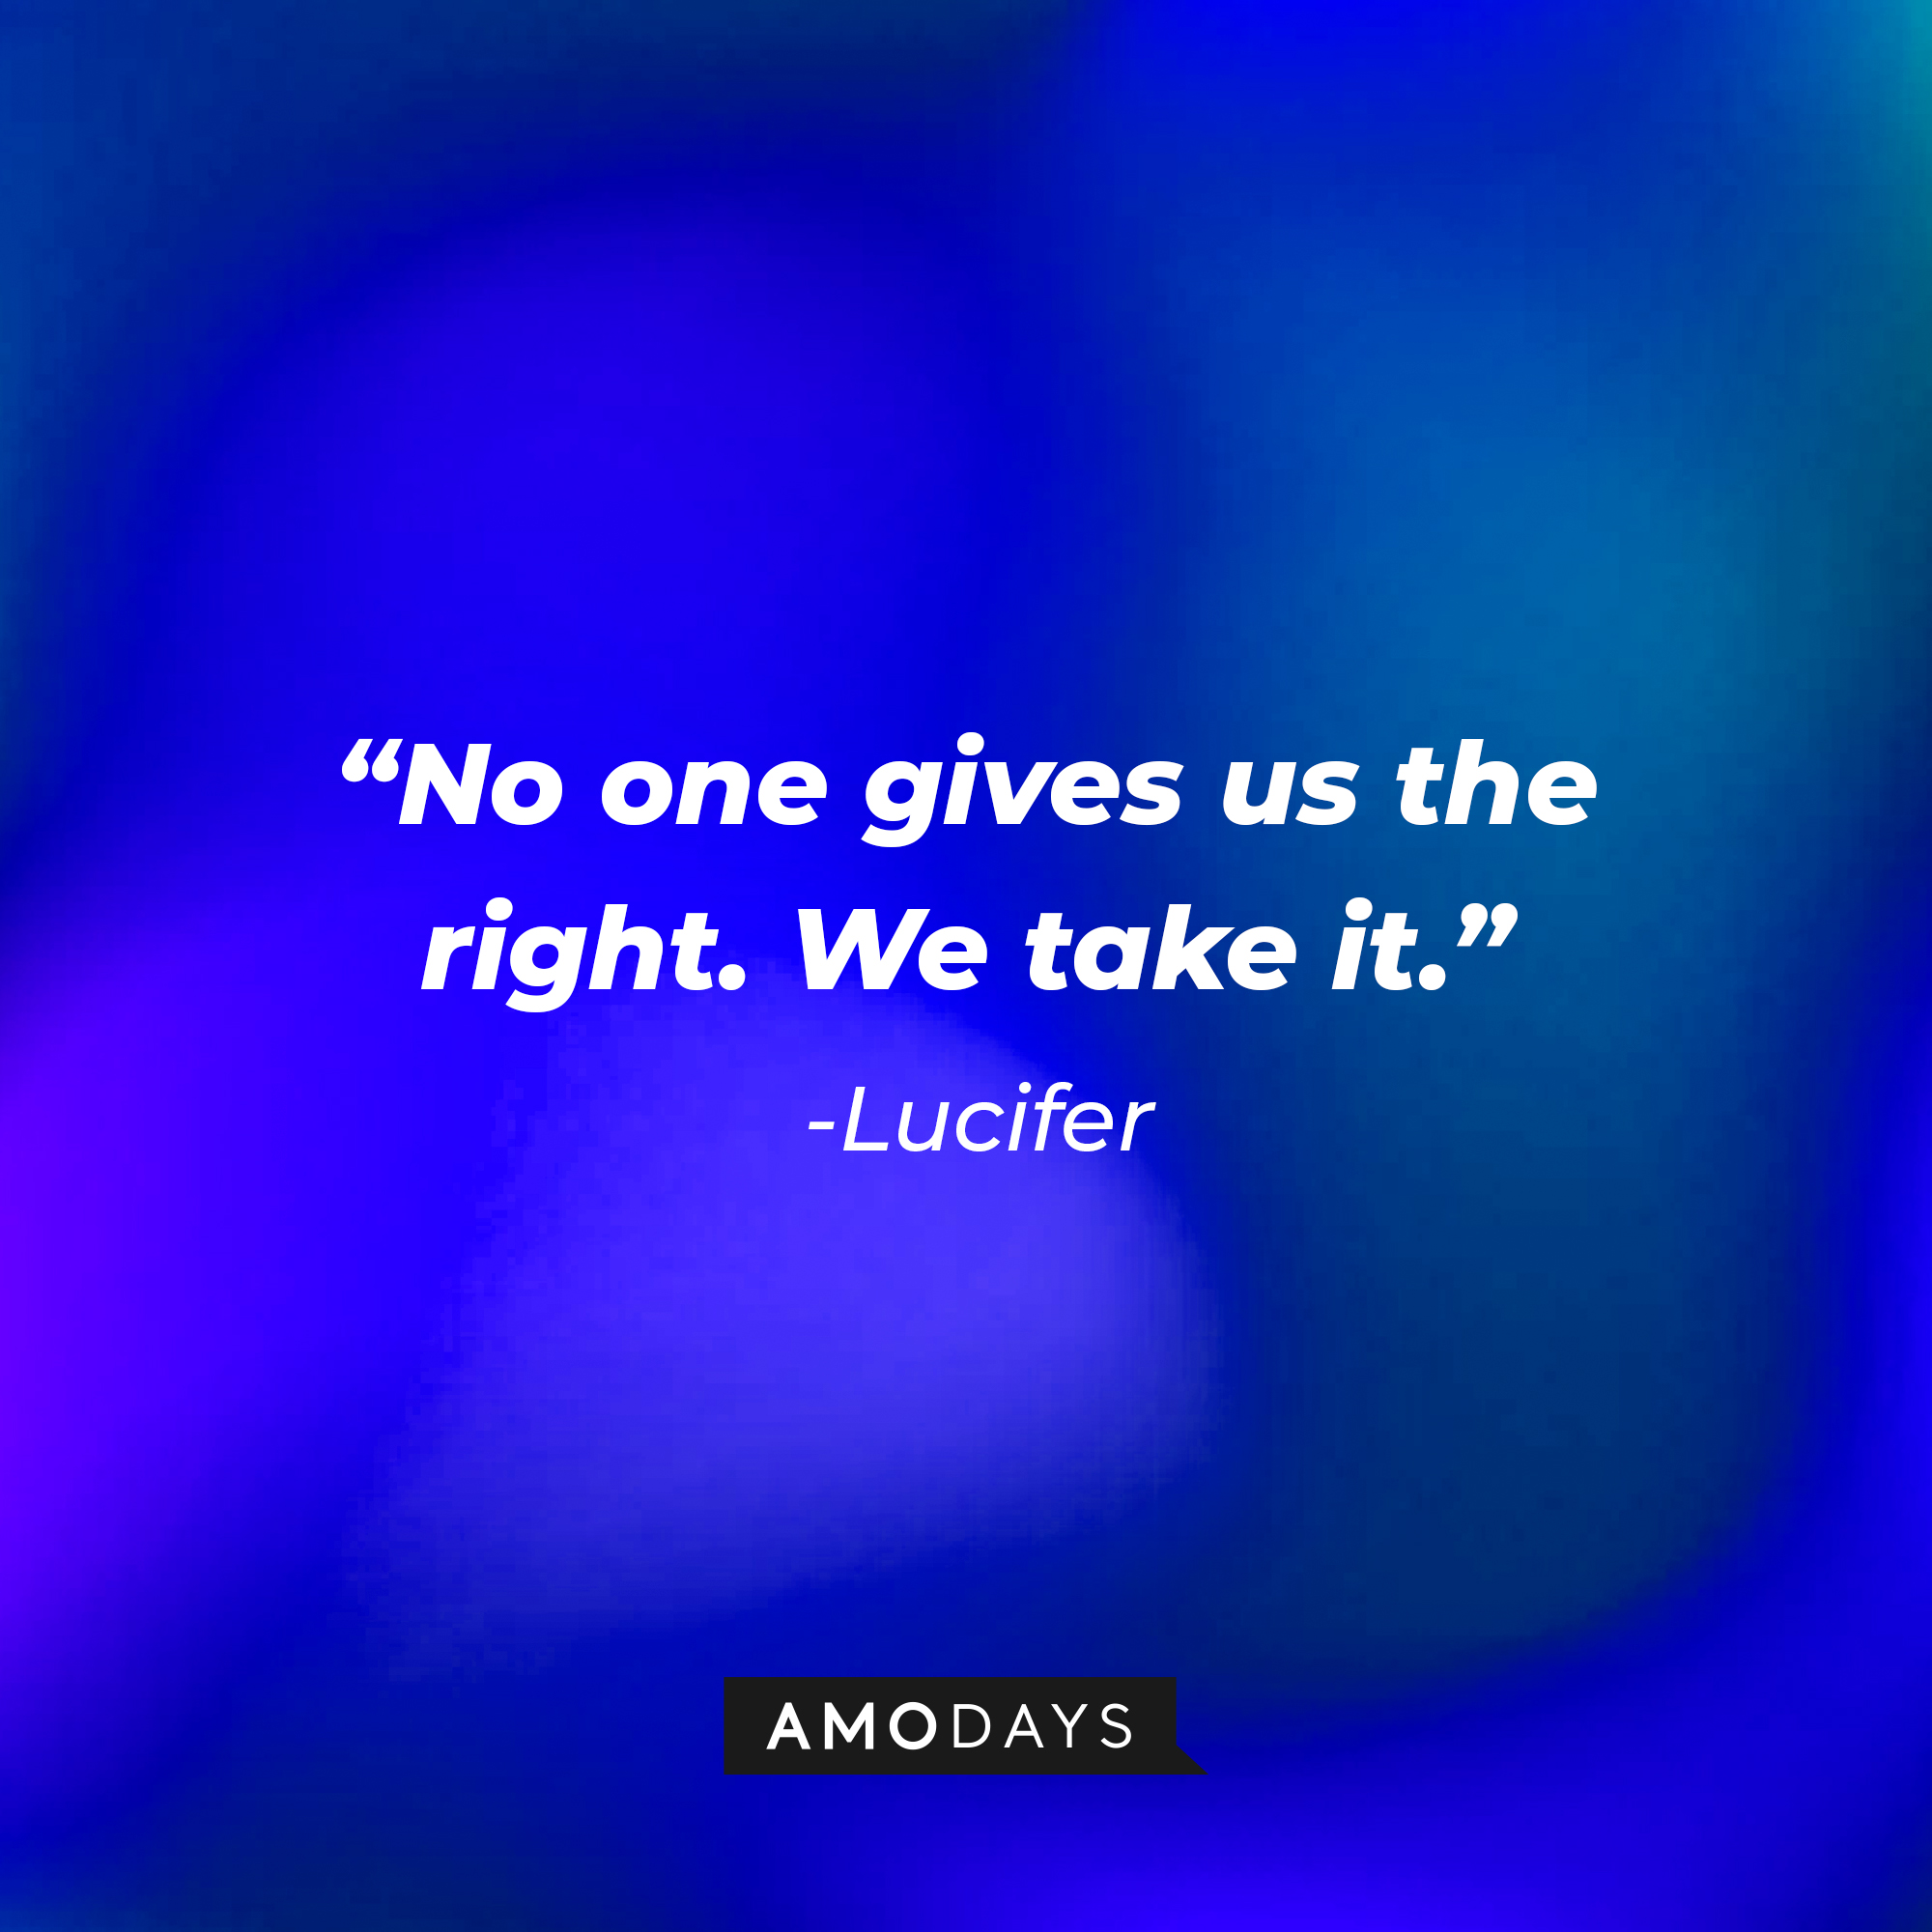 Lucifer’s quote: "No one gives us the right. We take it." | Source: AmoDays